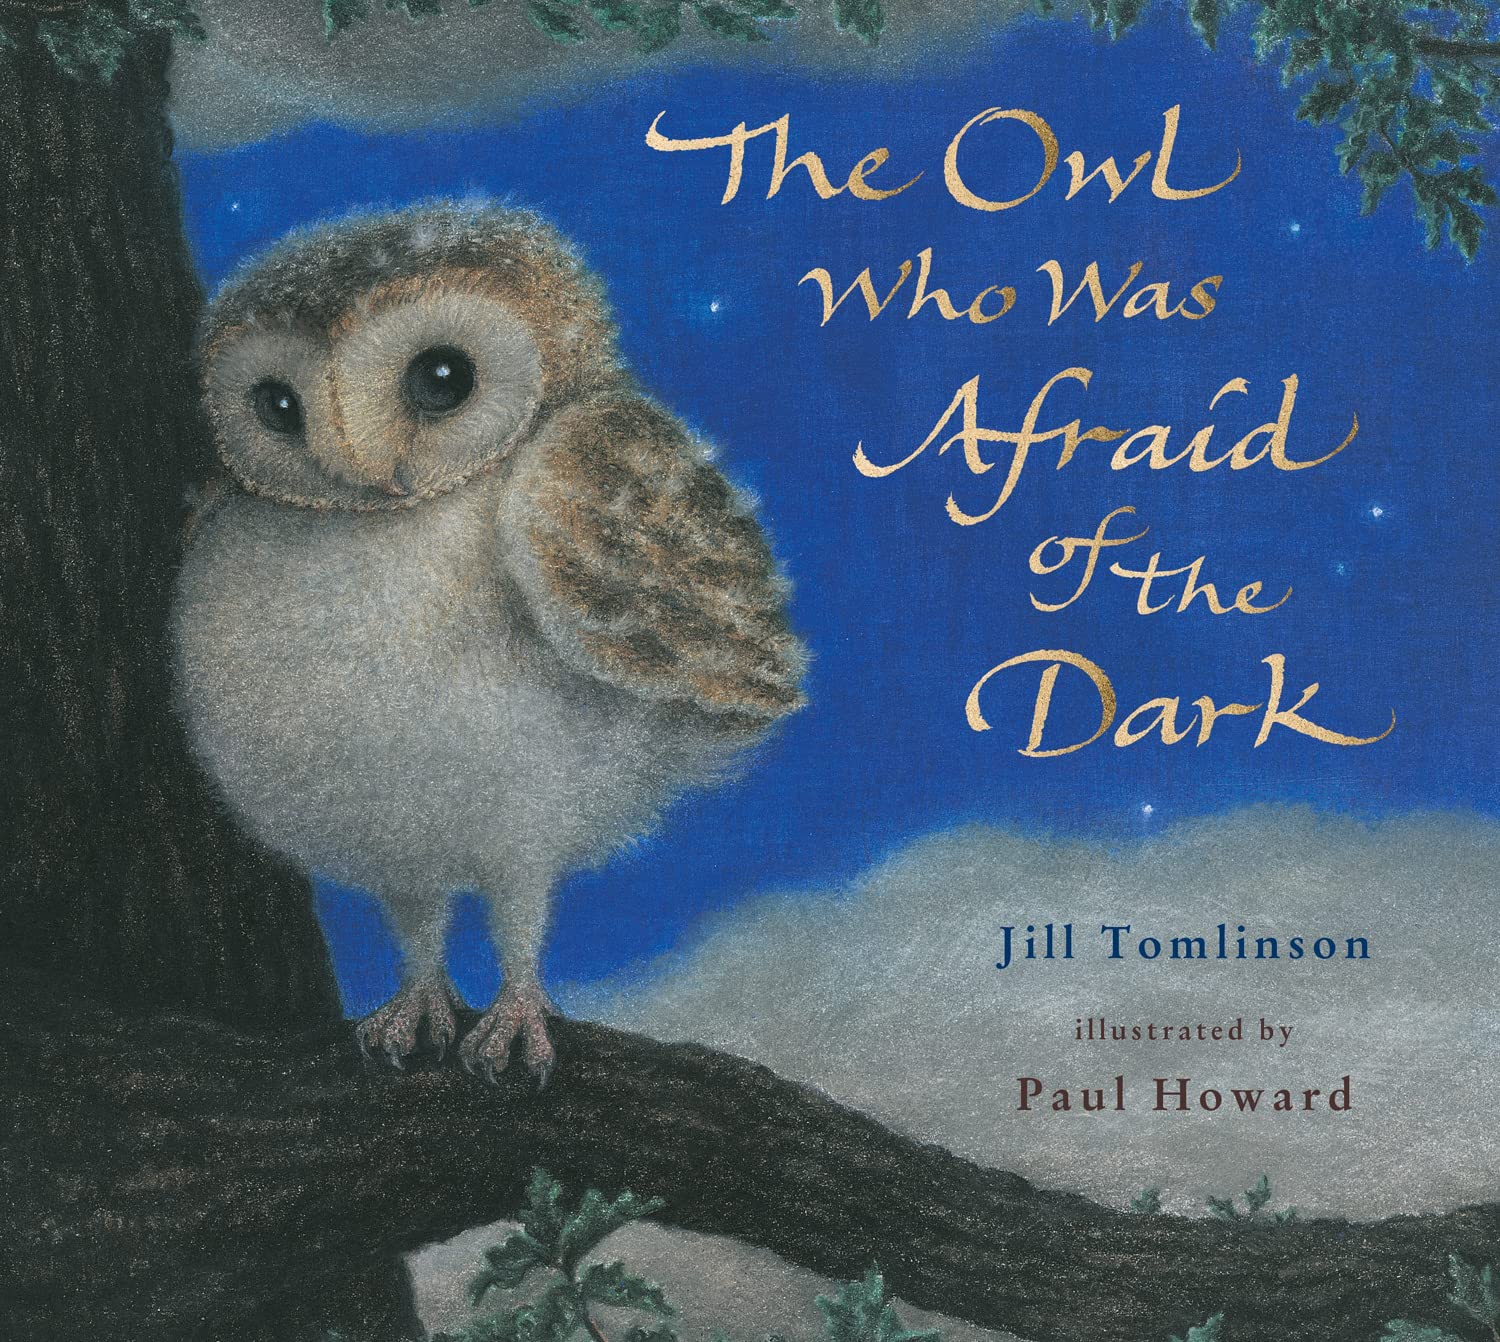 IMG : The Owl who was afraid of the dark